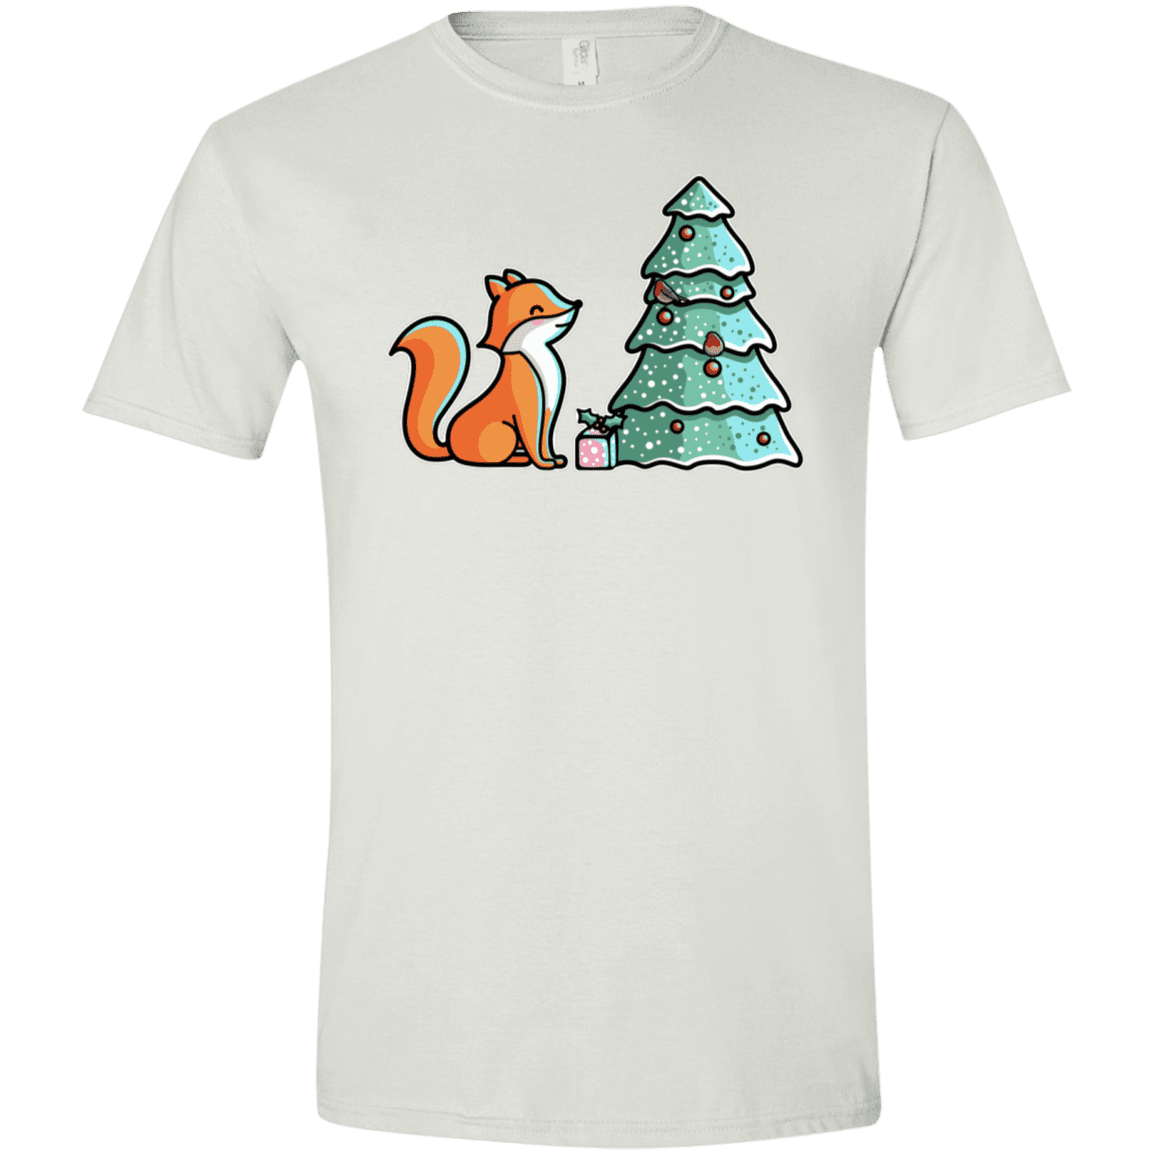 T-Shirts White / X-Small Kawaii Cute Christmas Fox Men's Semi-Fitted Softstyle